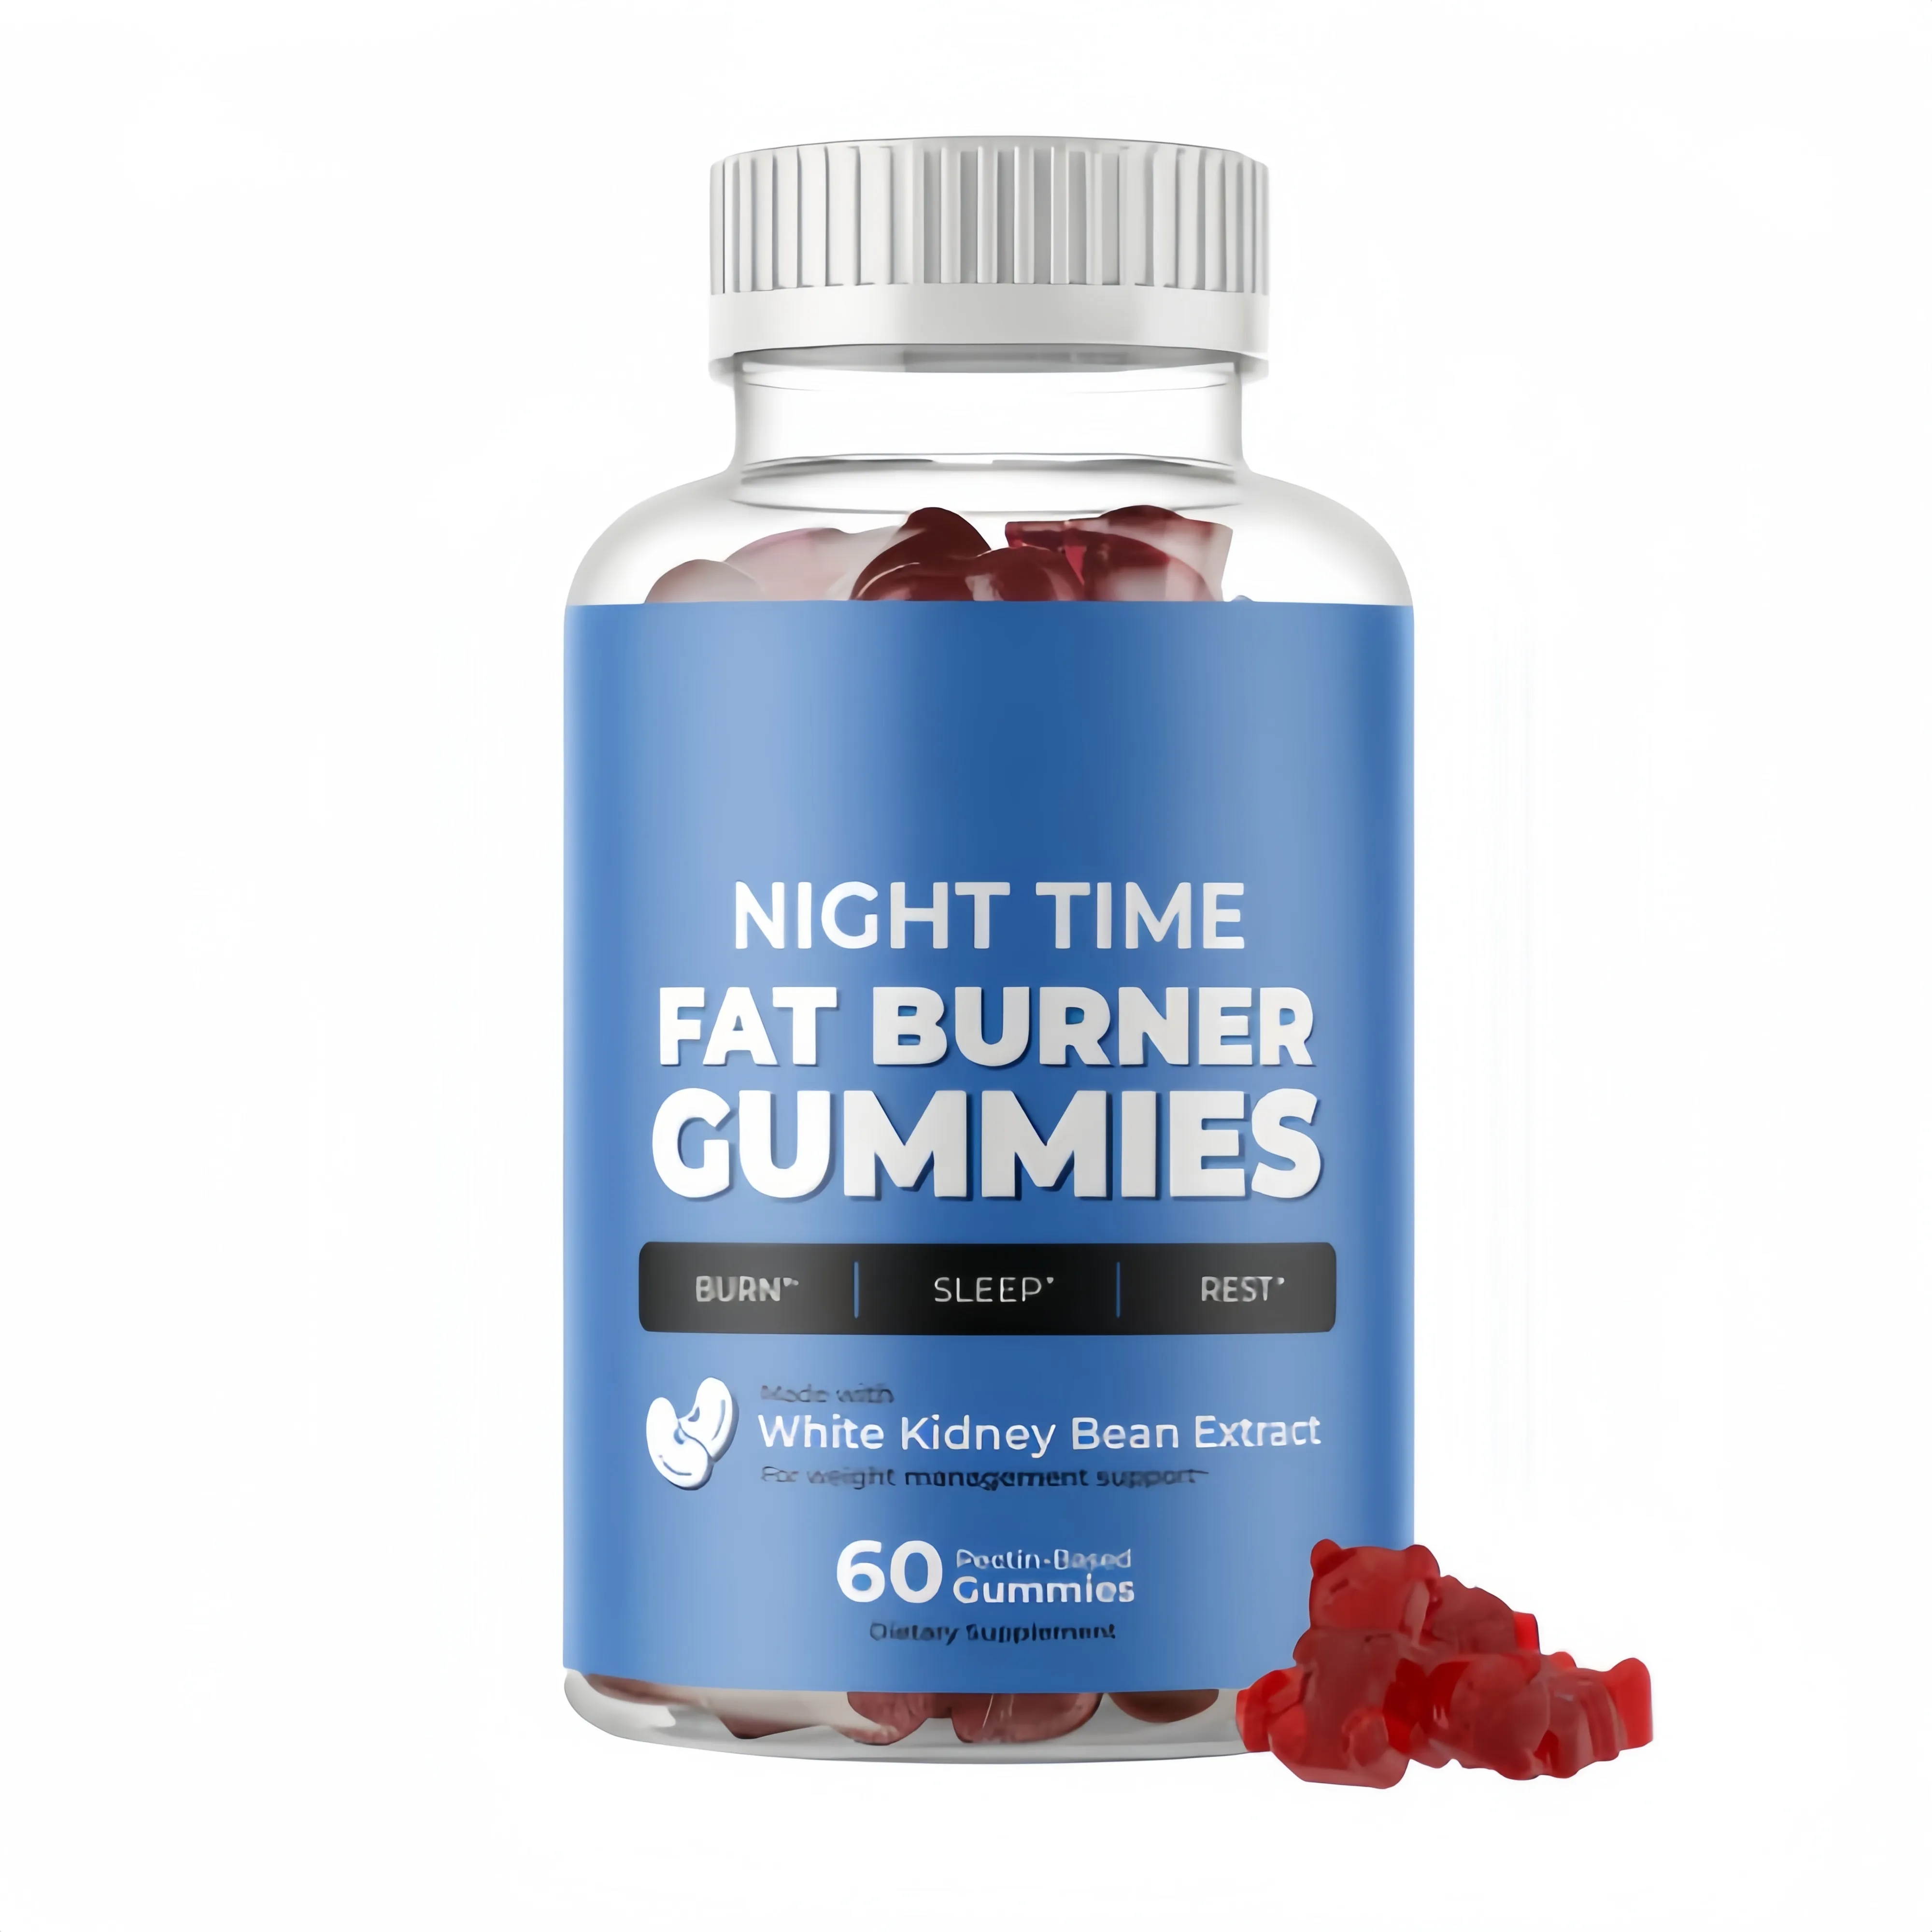 Prevents sugar from being converted into fat private label gummy candy fast weight loss